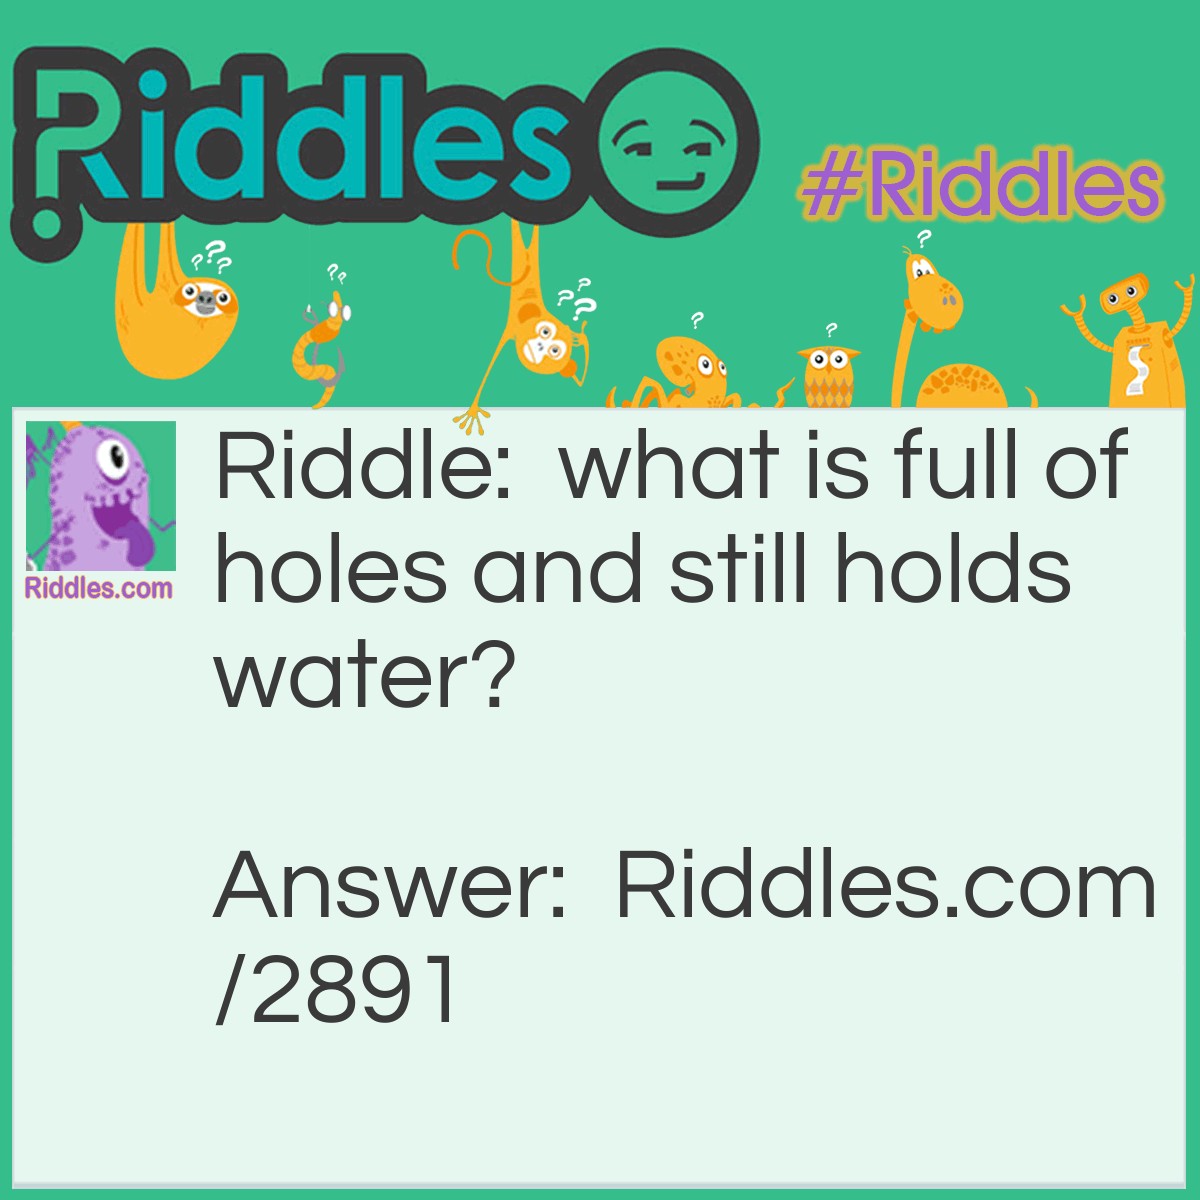 Riddle: What is full of holes and still holds water? Answer: A Sponge.